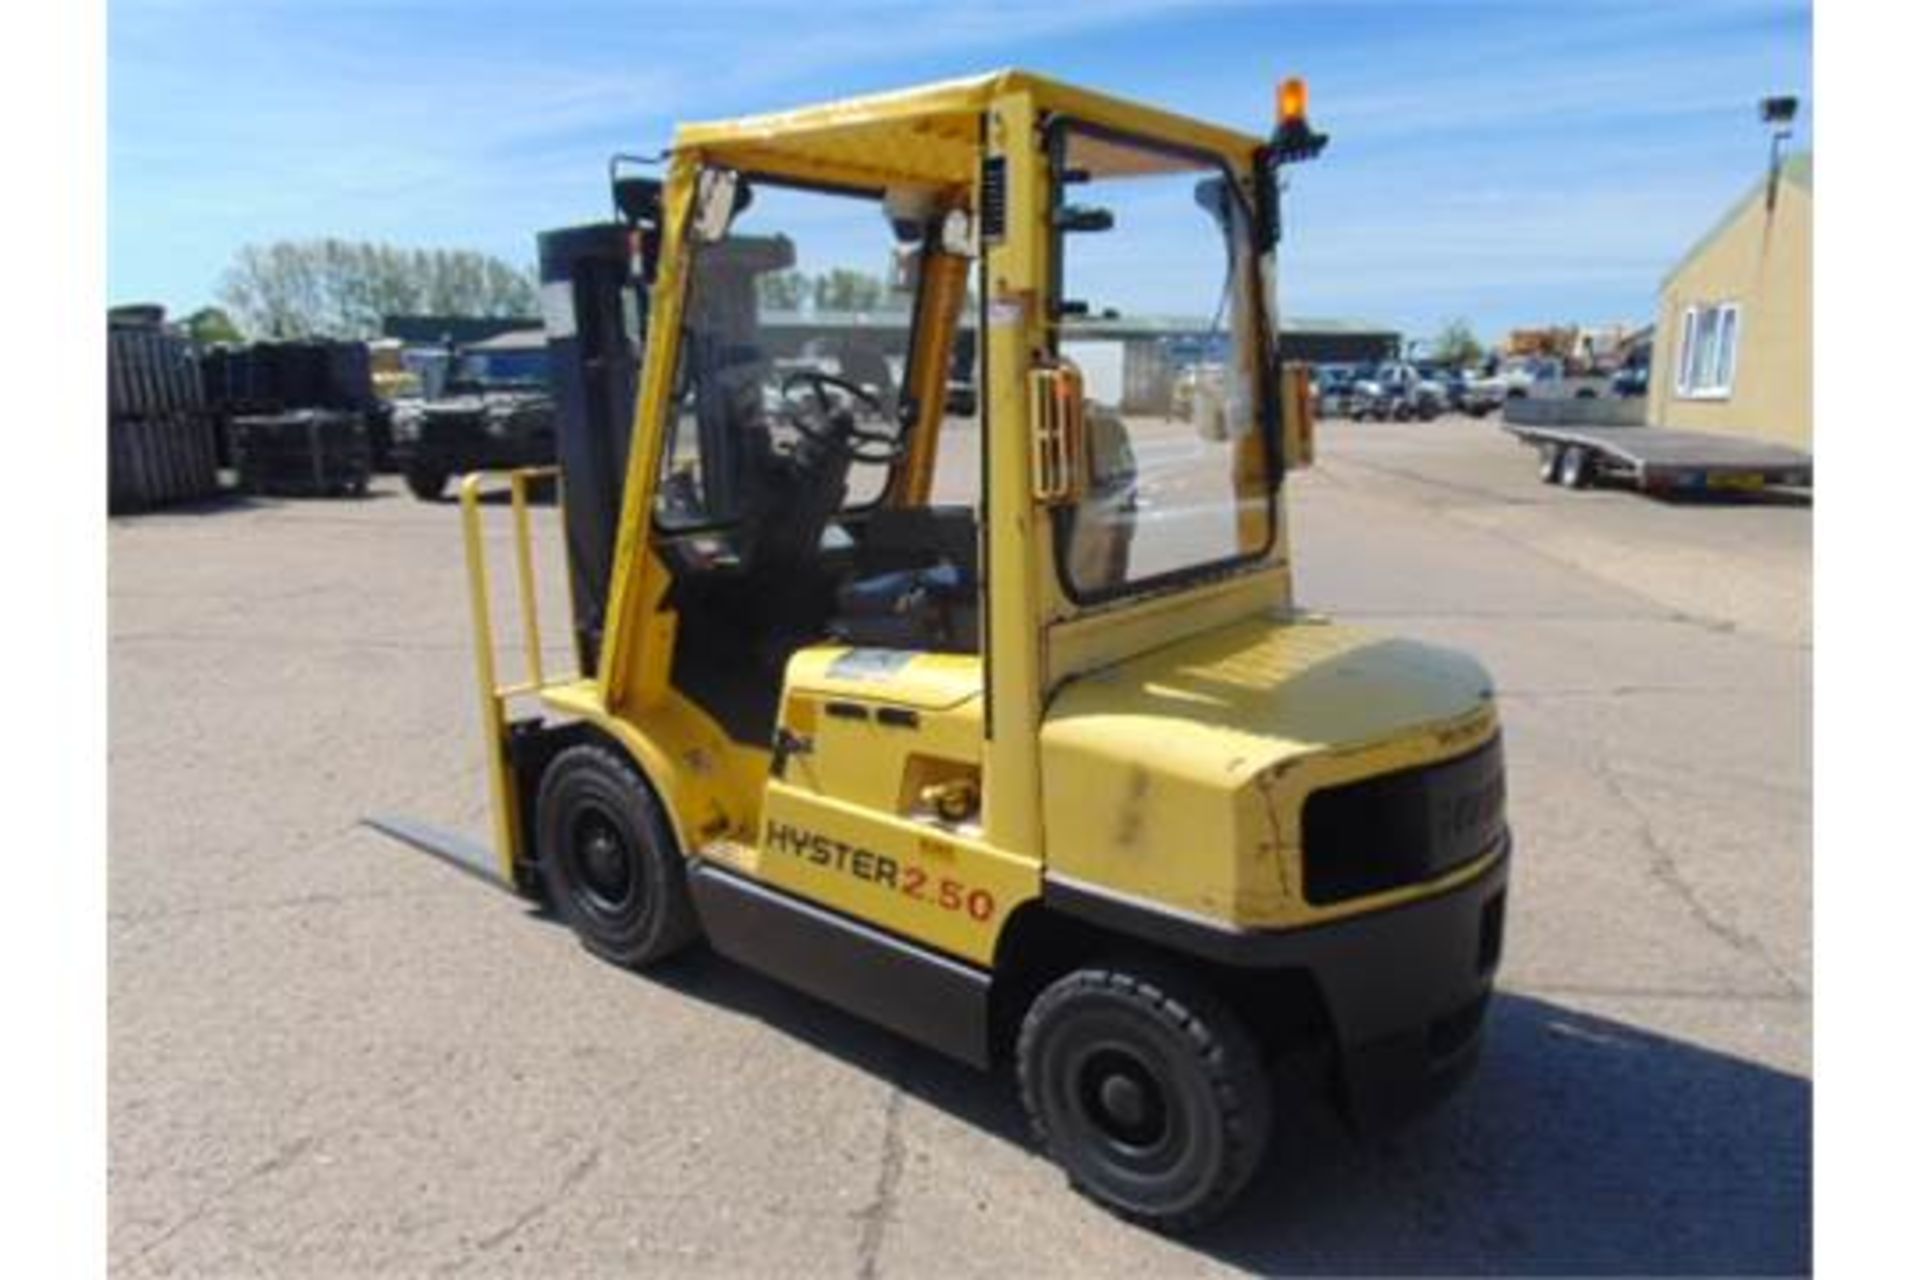 Hyster 2.50 Diesel Forklift ONLY 763.4 hours!! - Image 8 of 28